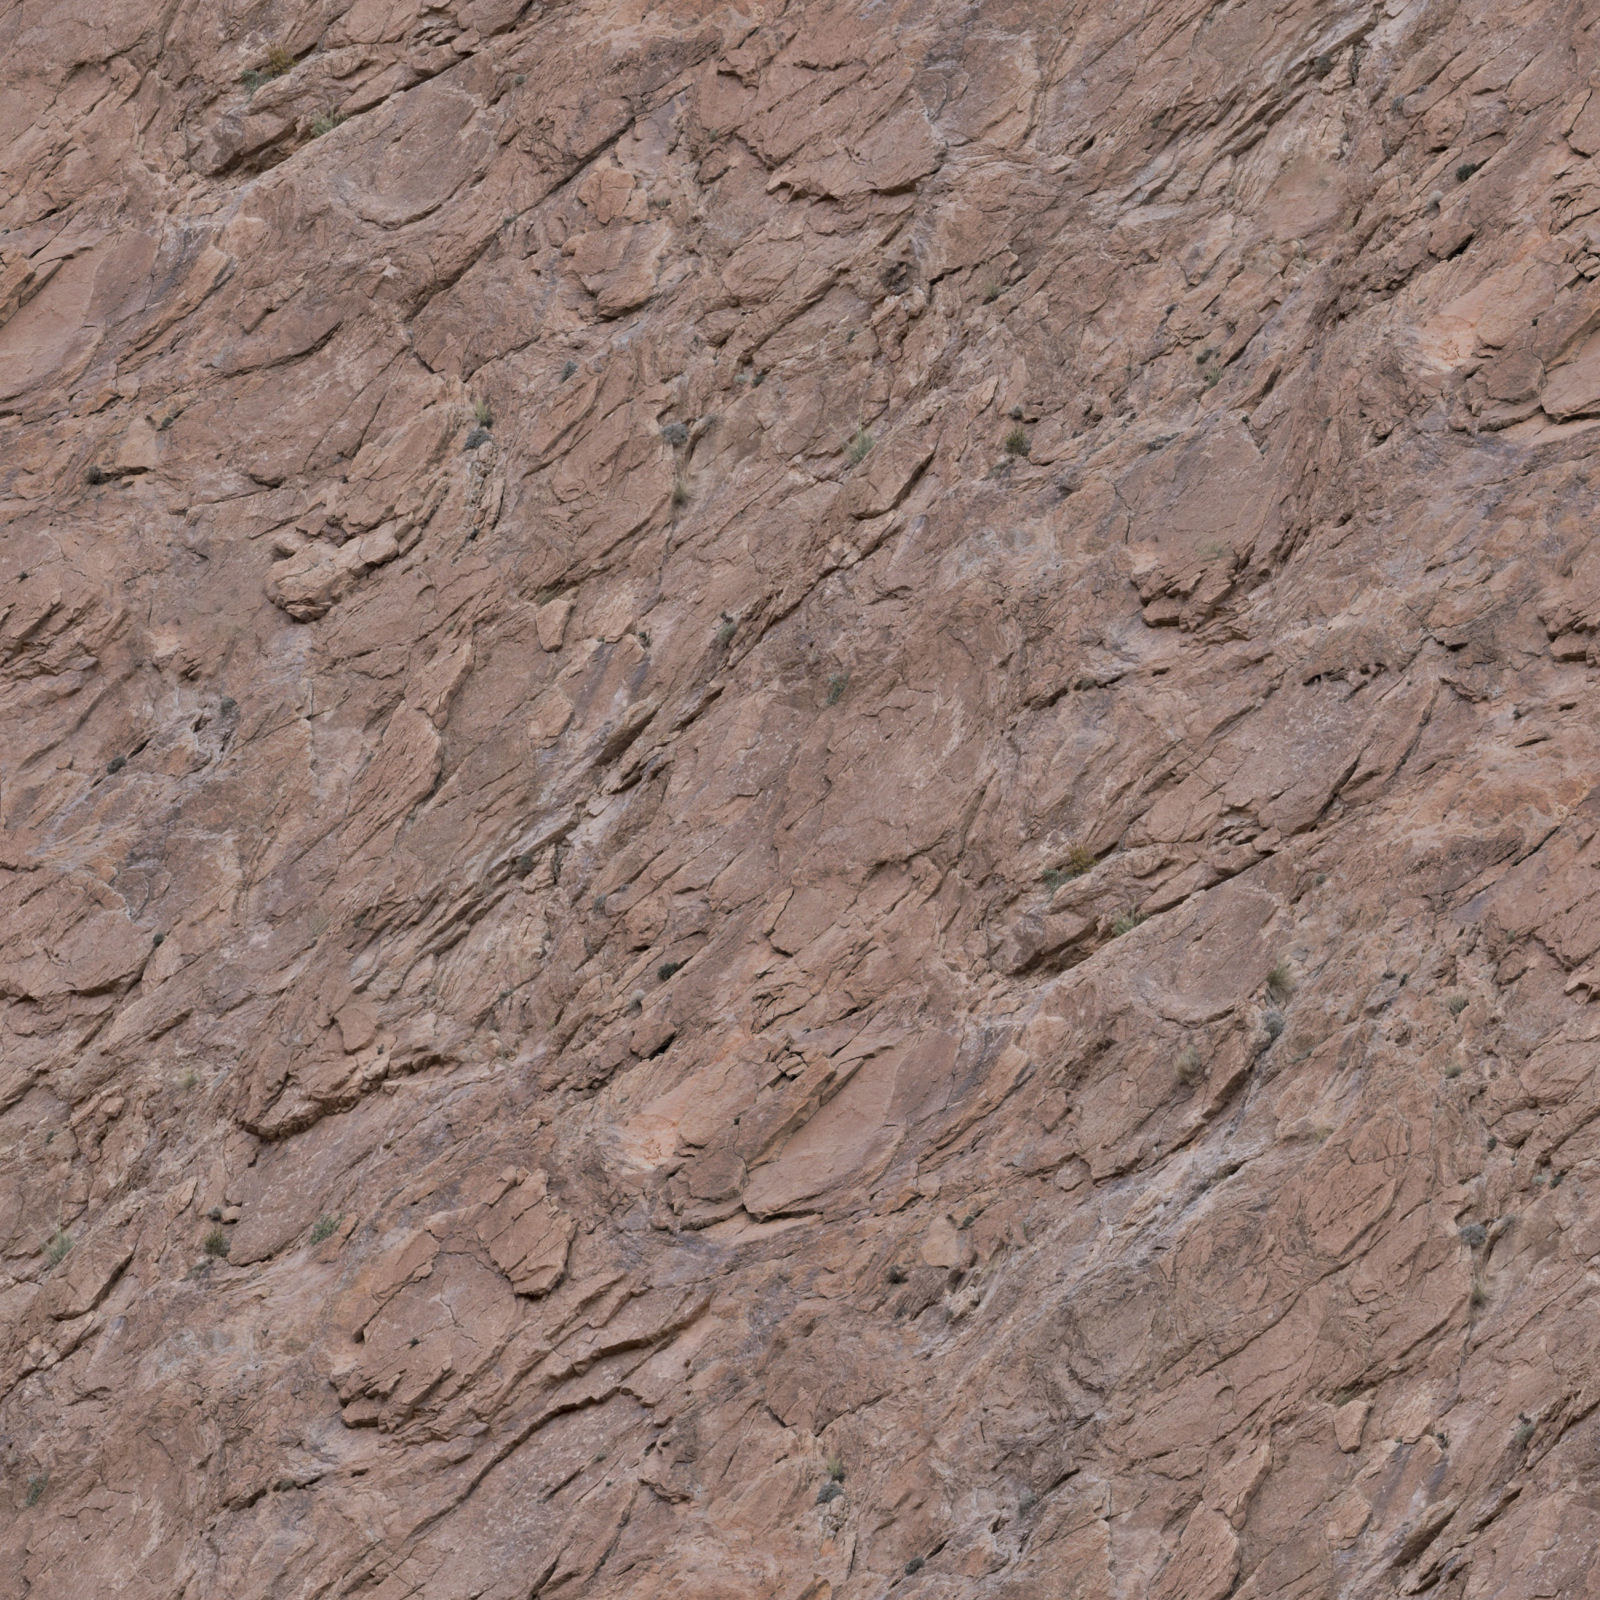 High Resolution Textures Stone